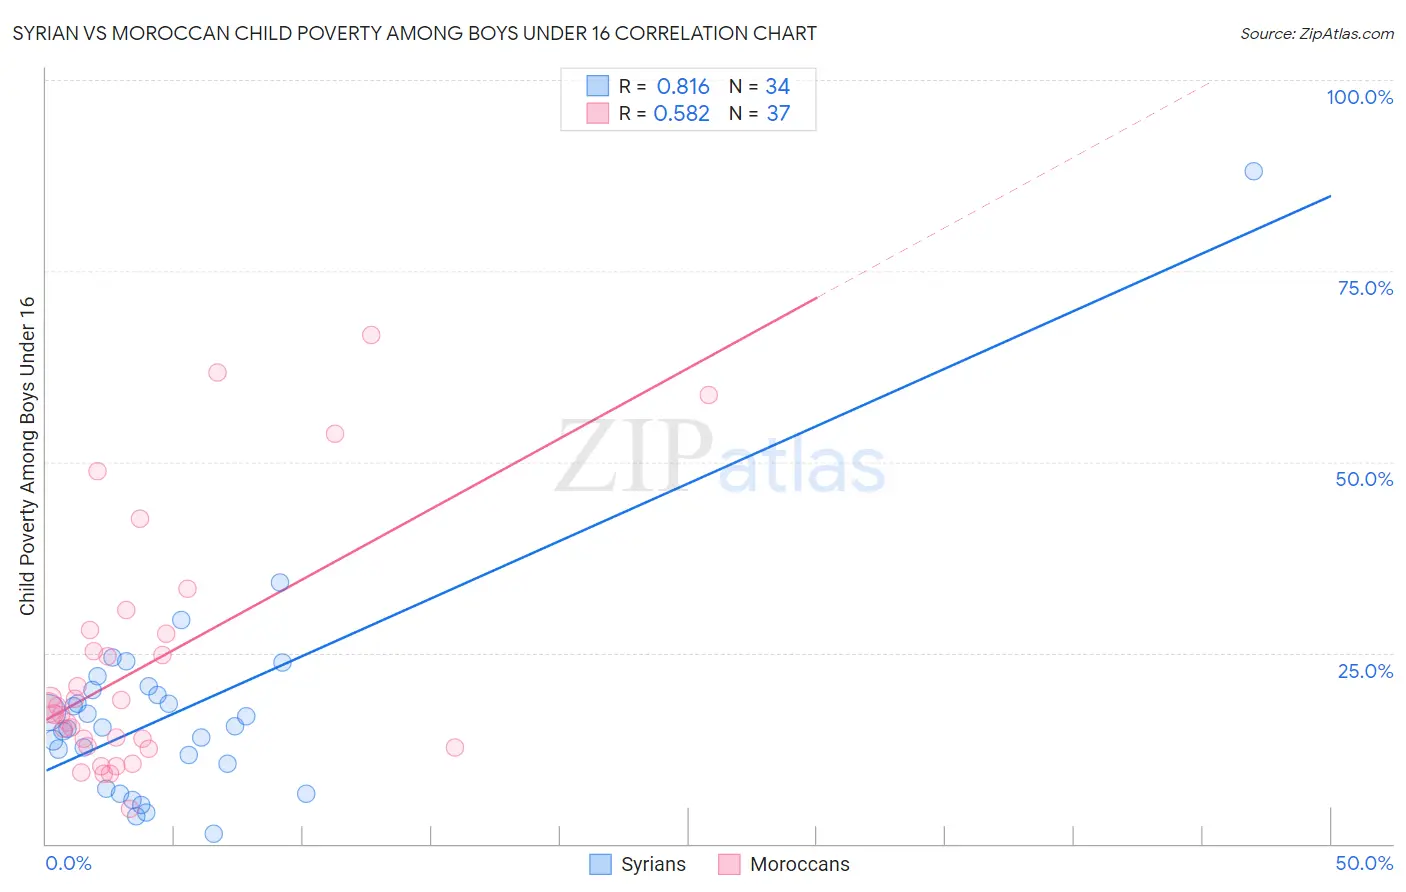 Syrian vs Moroccan Child Poverty Among Boys Under 16